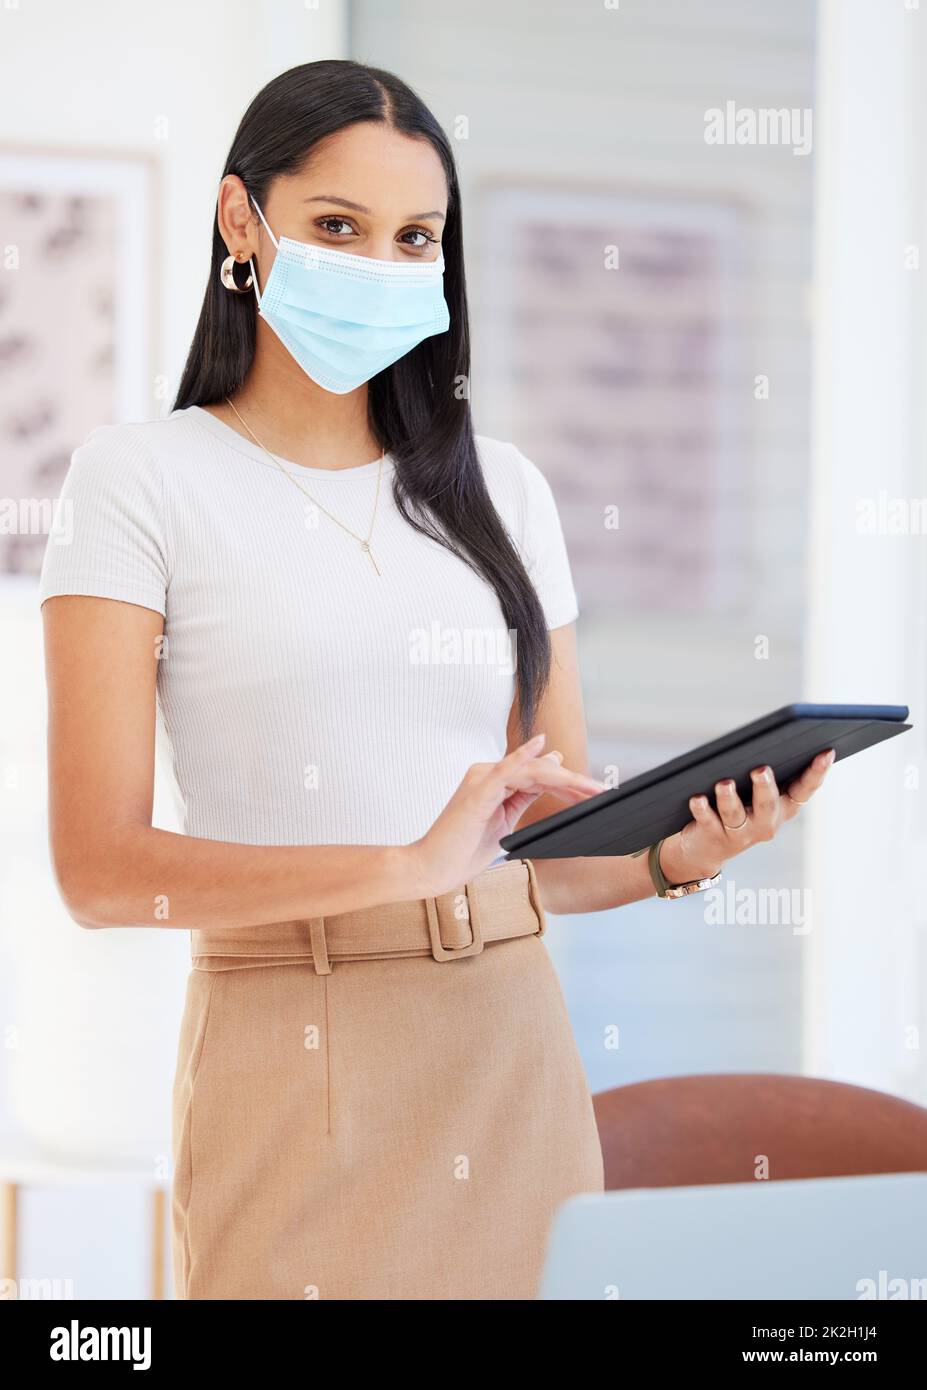 Its important to keep the workplace safe. Shot of a young businesswoman using a digital tablet in her office. Stock Photo